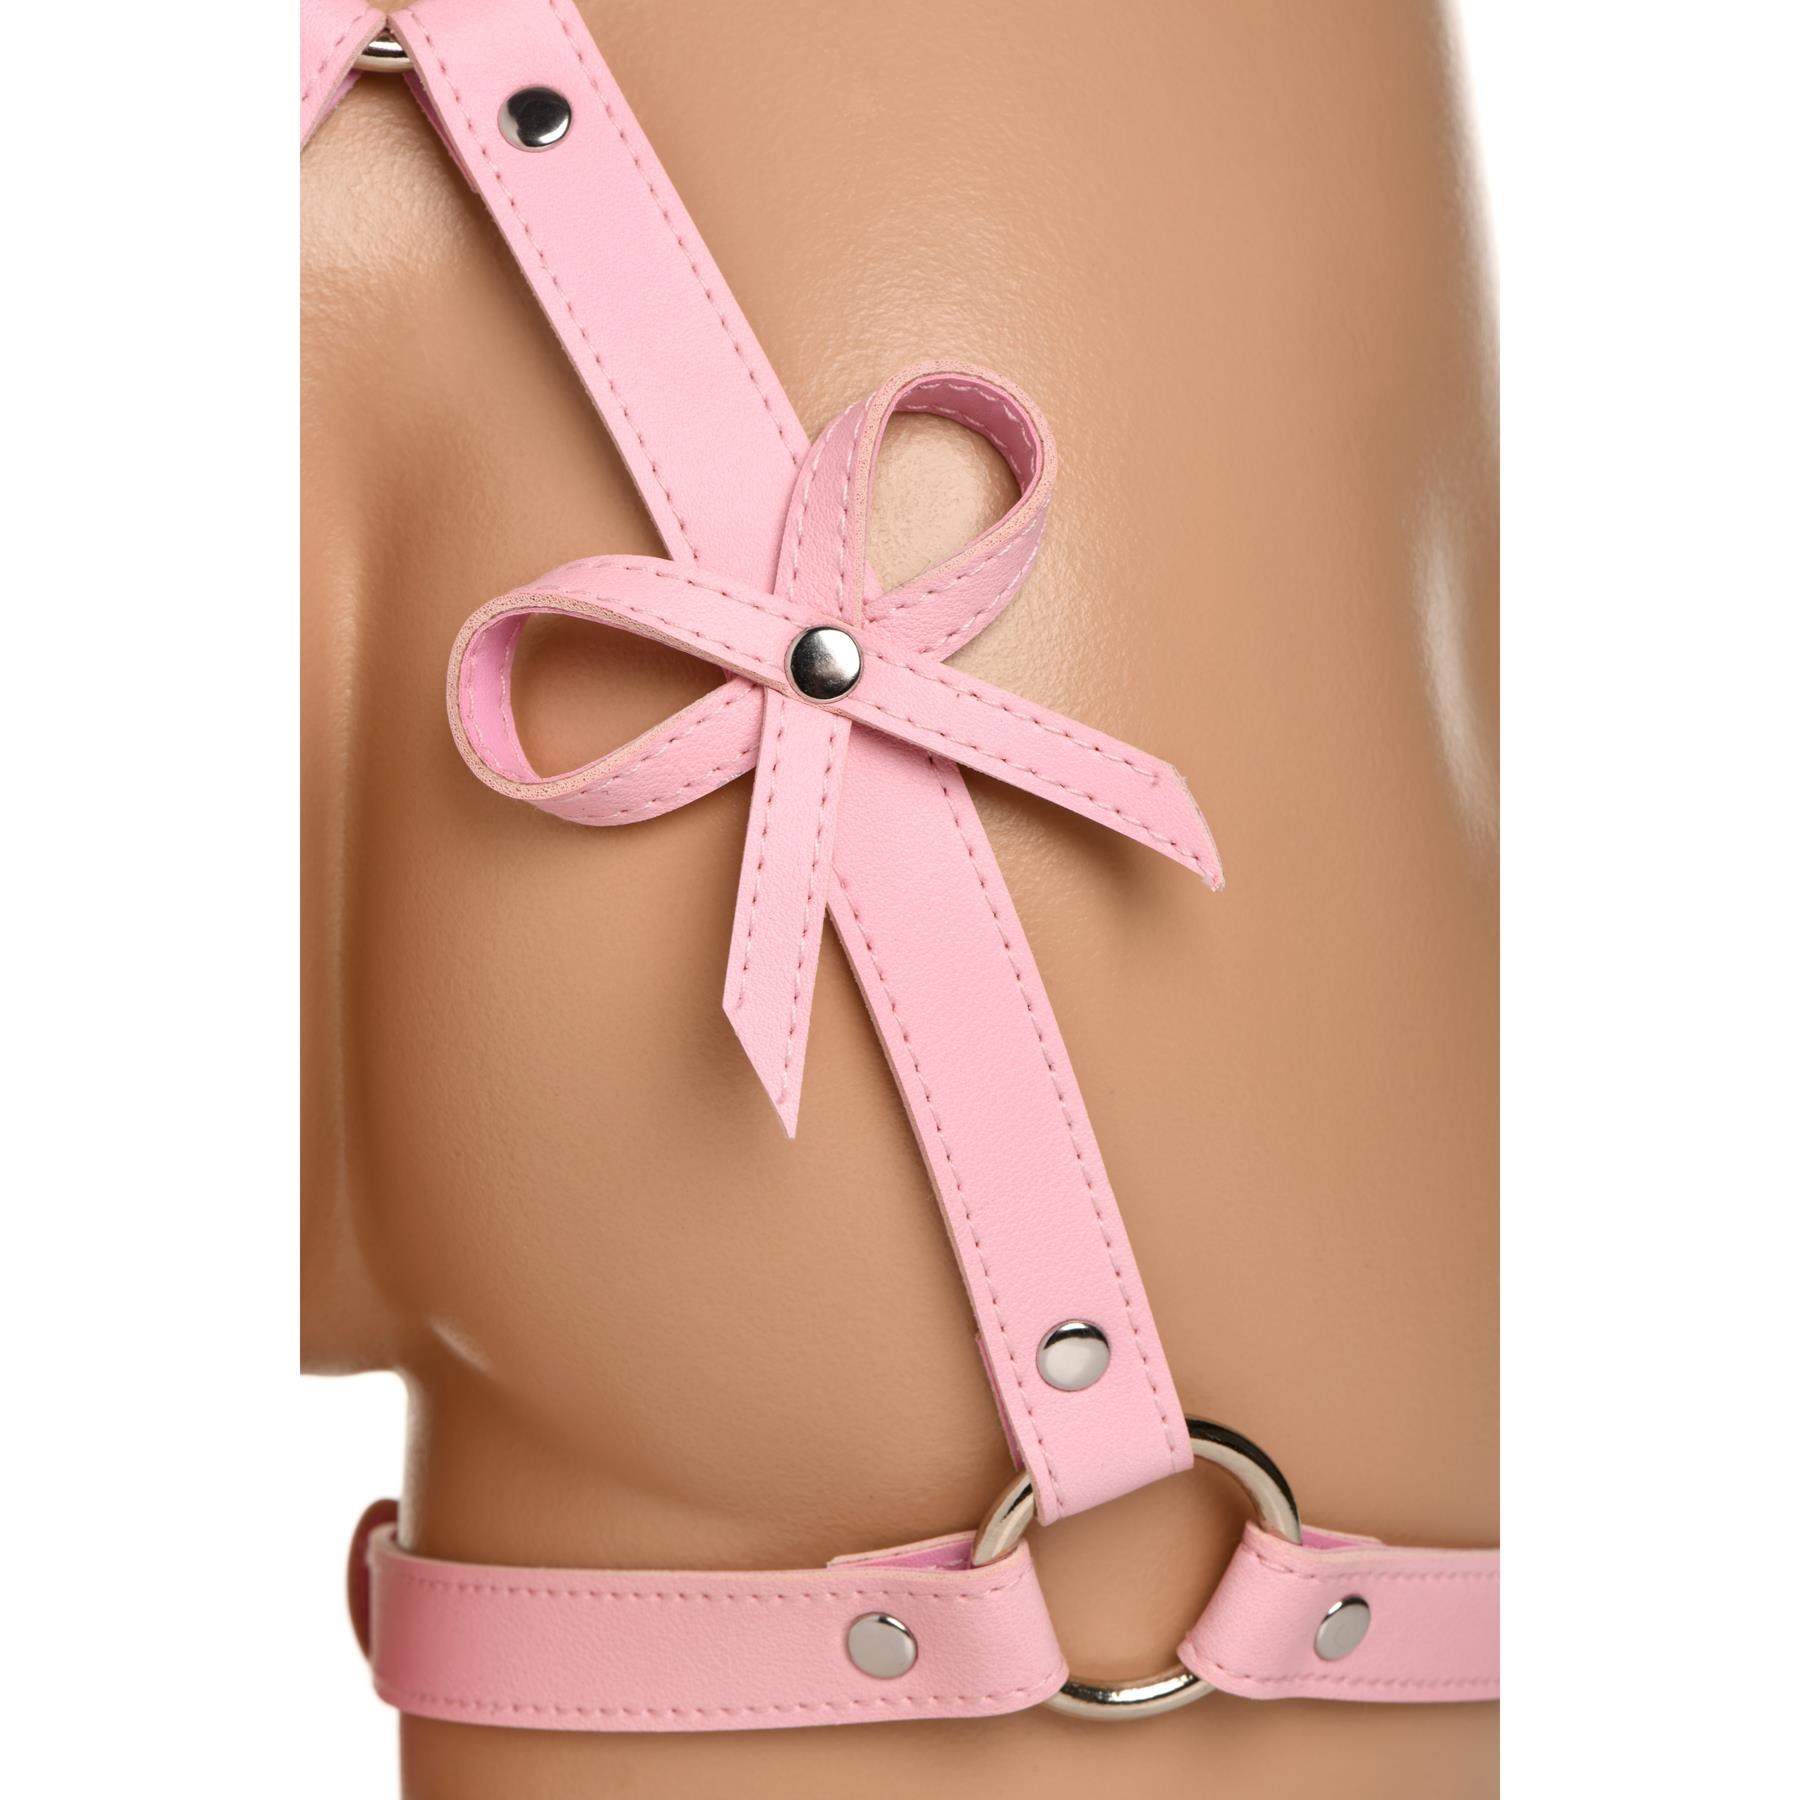 Strict Bondage Harness With Bows - Close Up on Bows